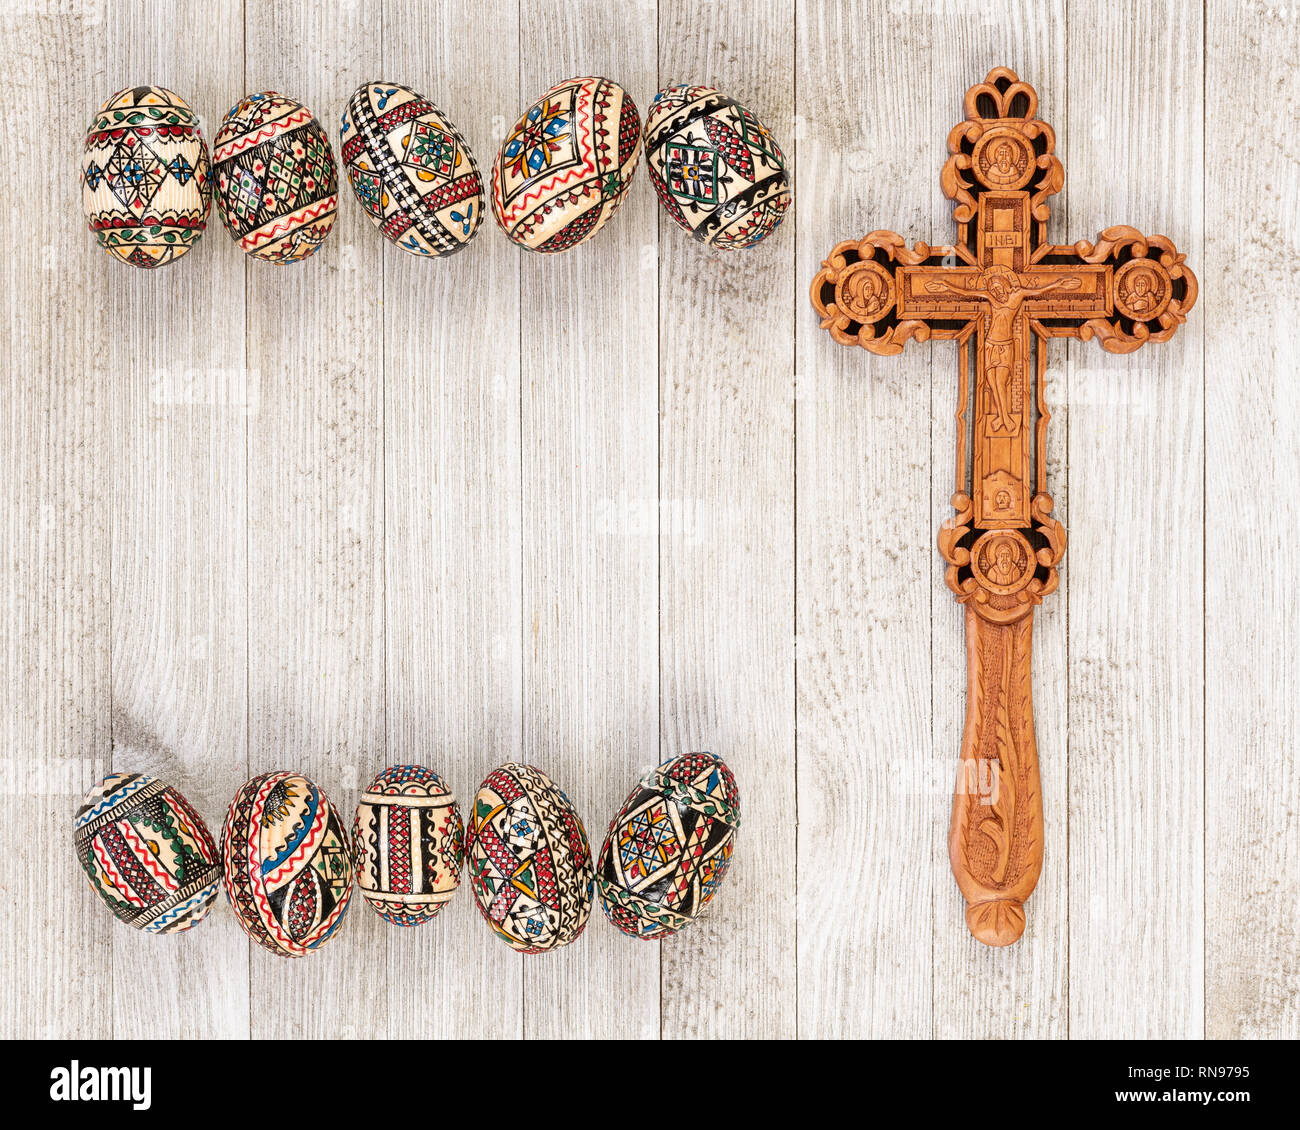 Painted wooden eggs traditional of Eastern Europe with delicately sculpted wooden cross and copy space. Stock Photo